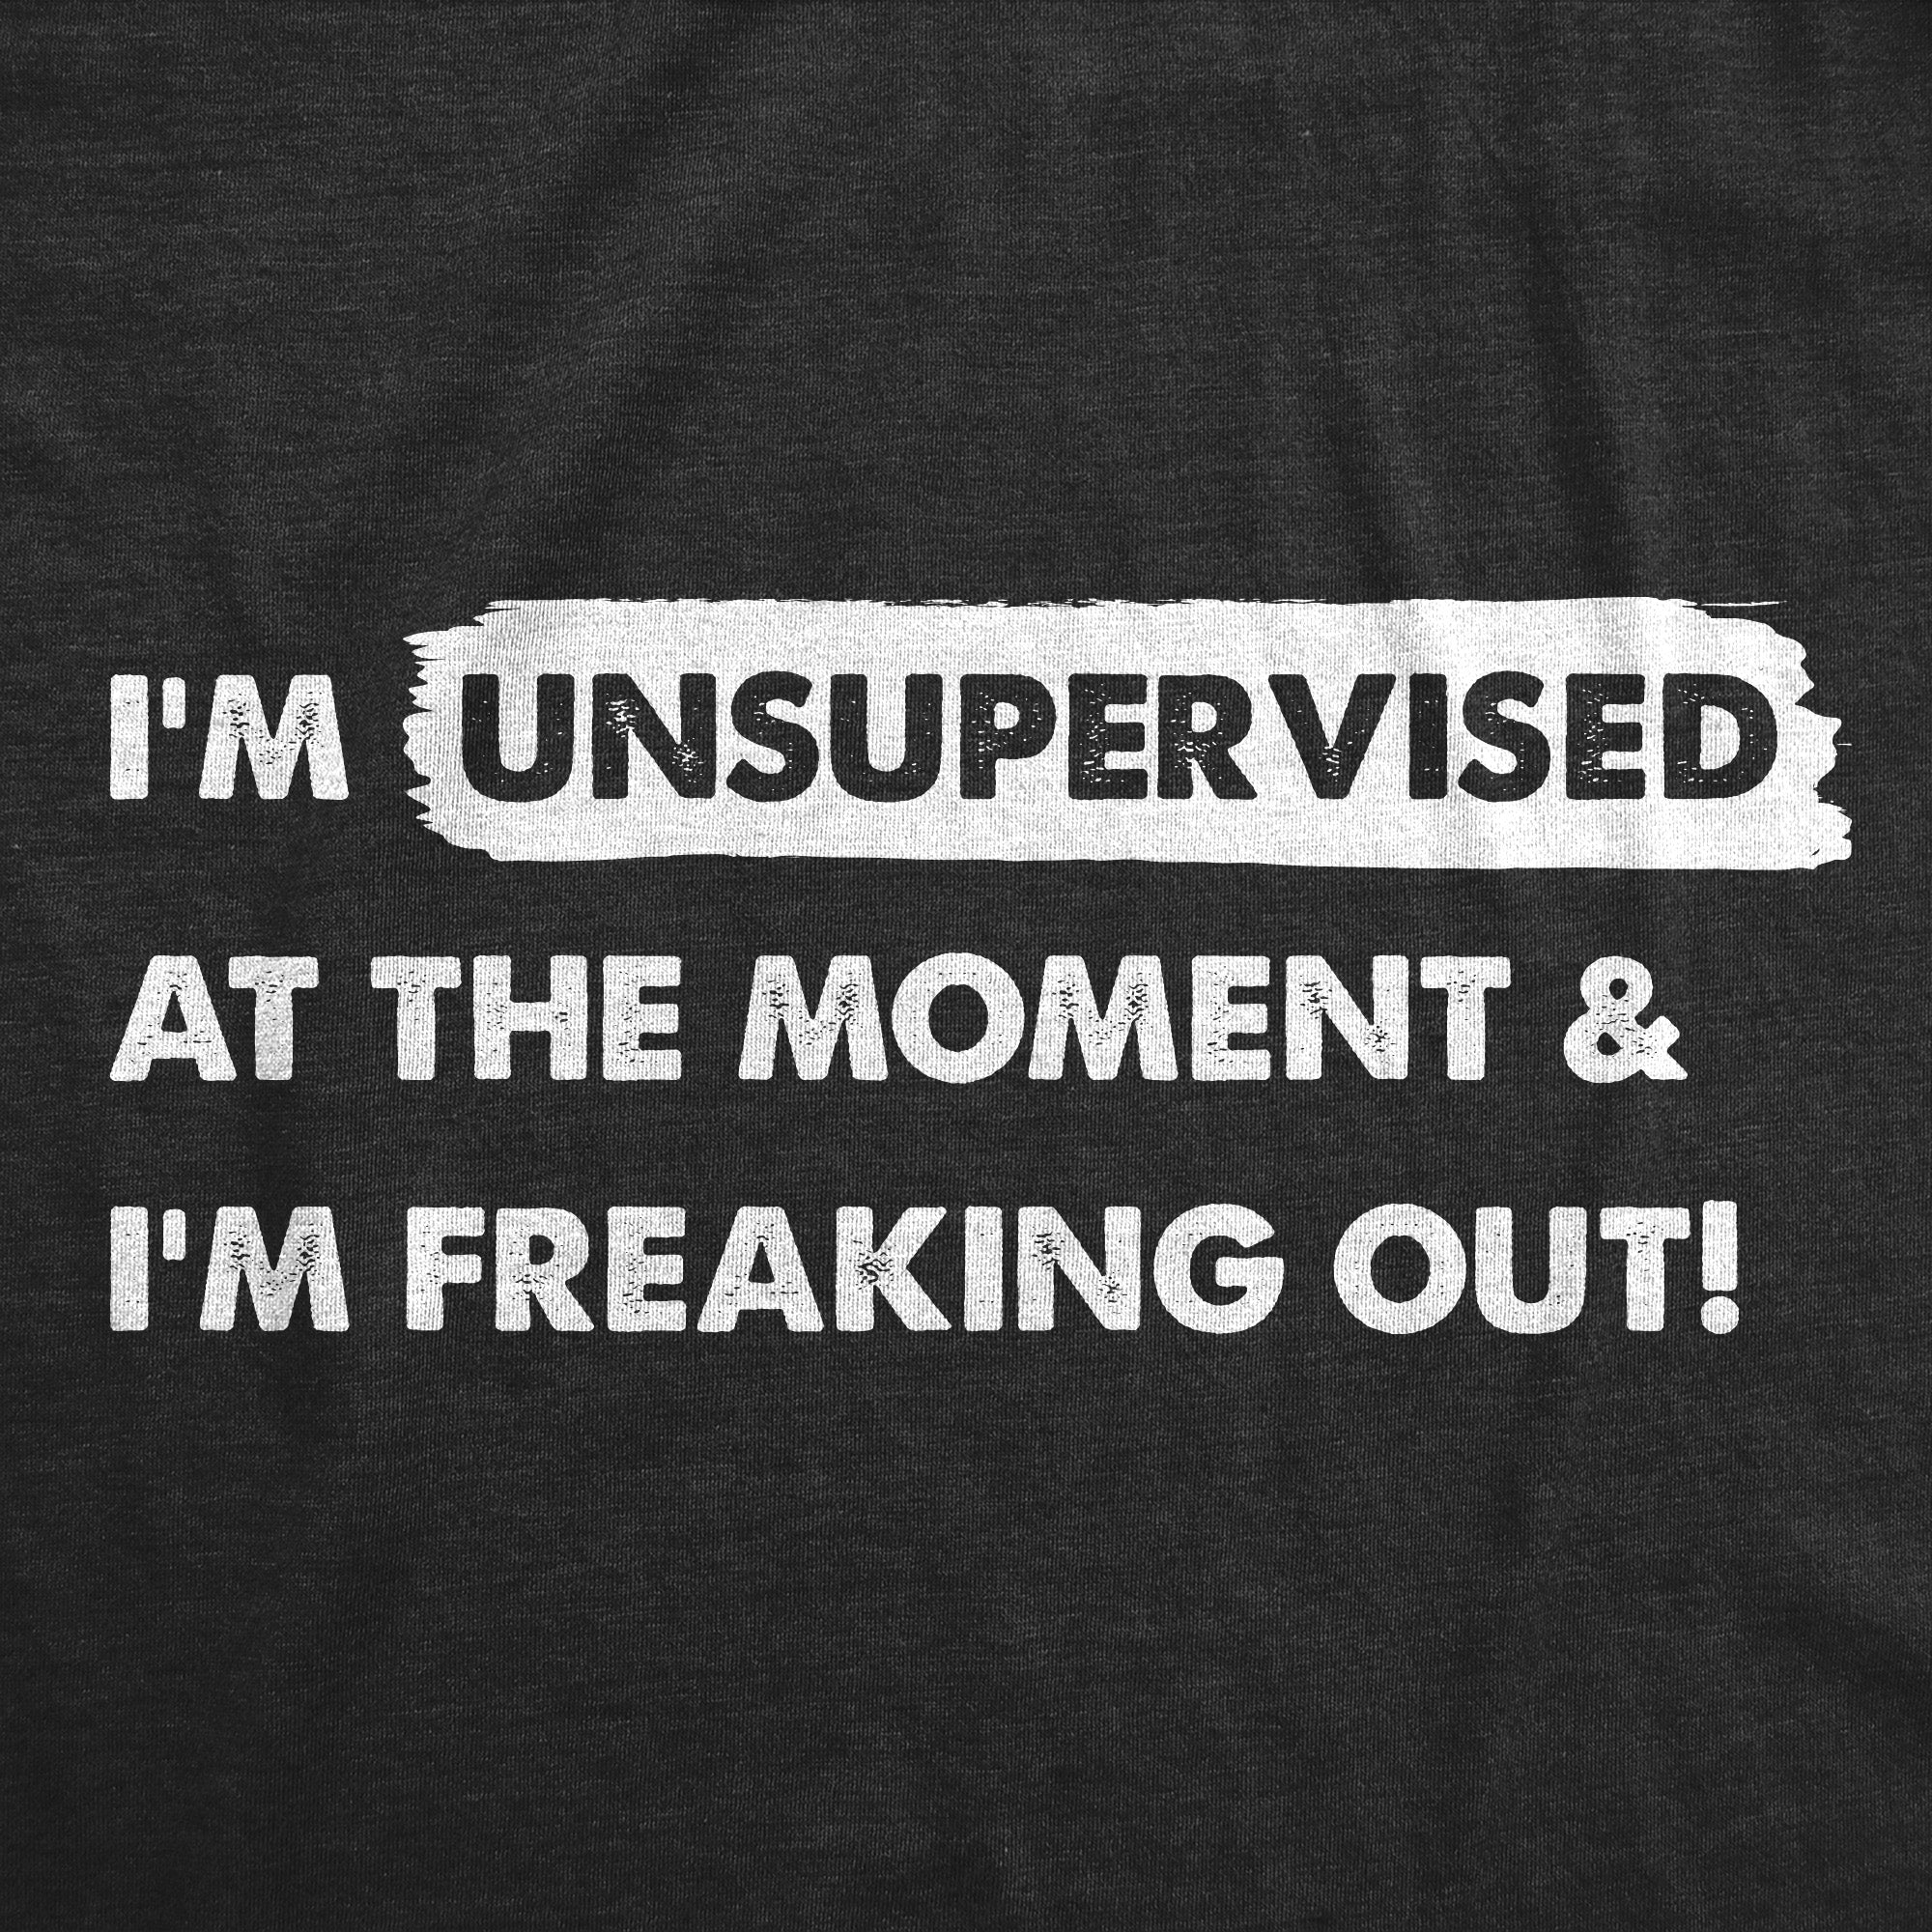 Funny Heather Black - FREAKING Im Unsupervised At The Moment And Im Freaking Out Mens T Shirt Nerdy Sarcastic Tee